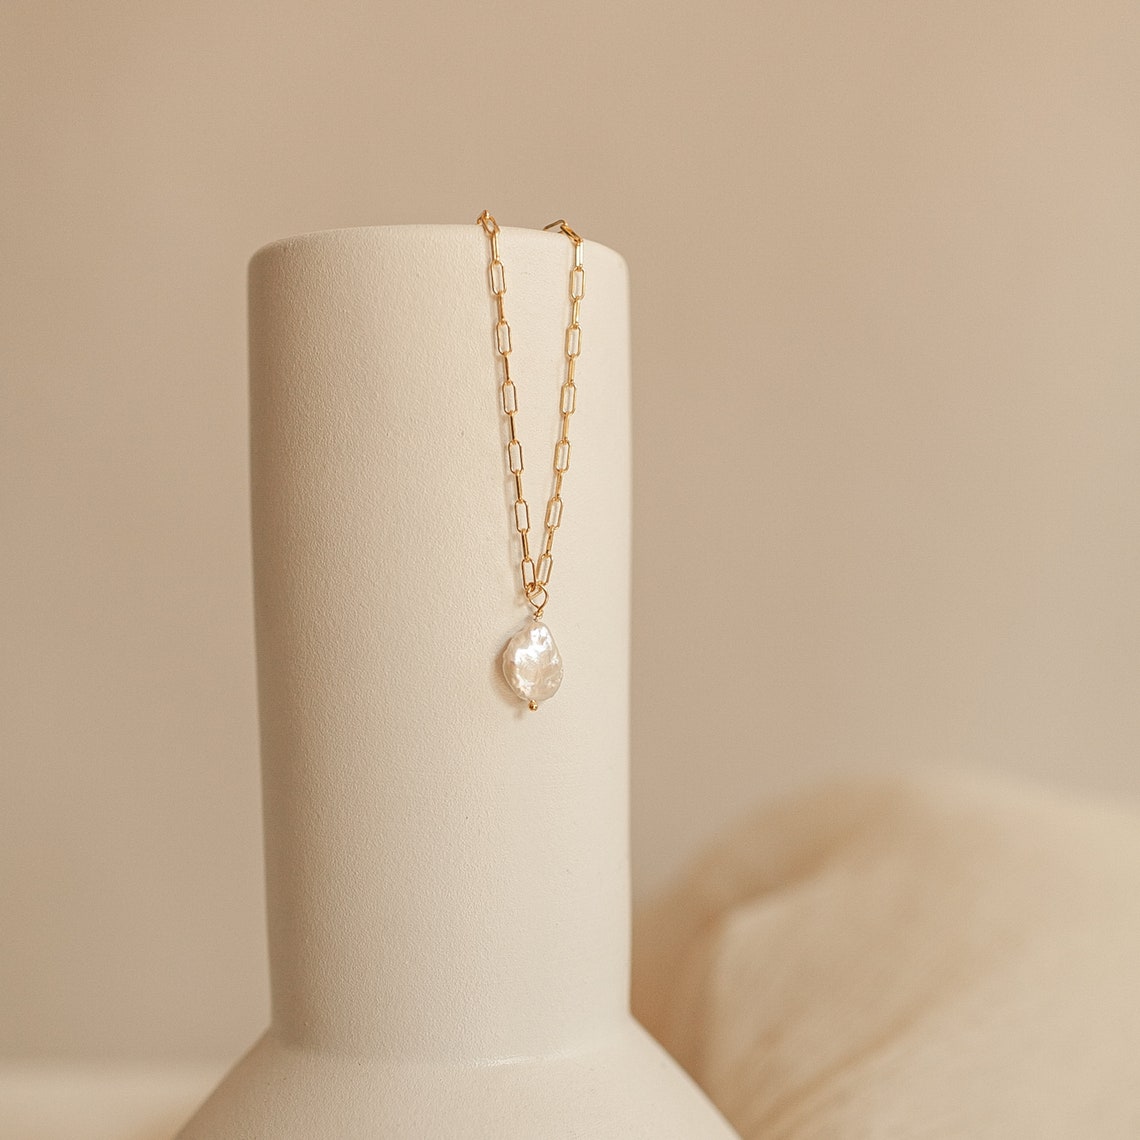 Baroque Pearl Pendant Necklace by Caitlyn Minimalist - Etsy